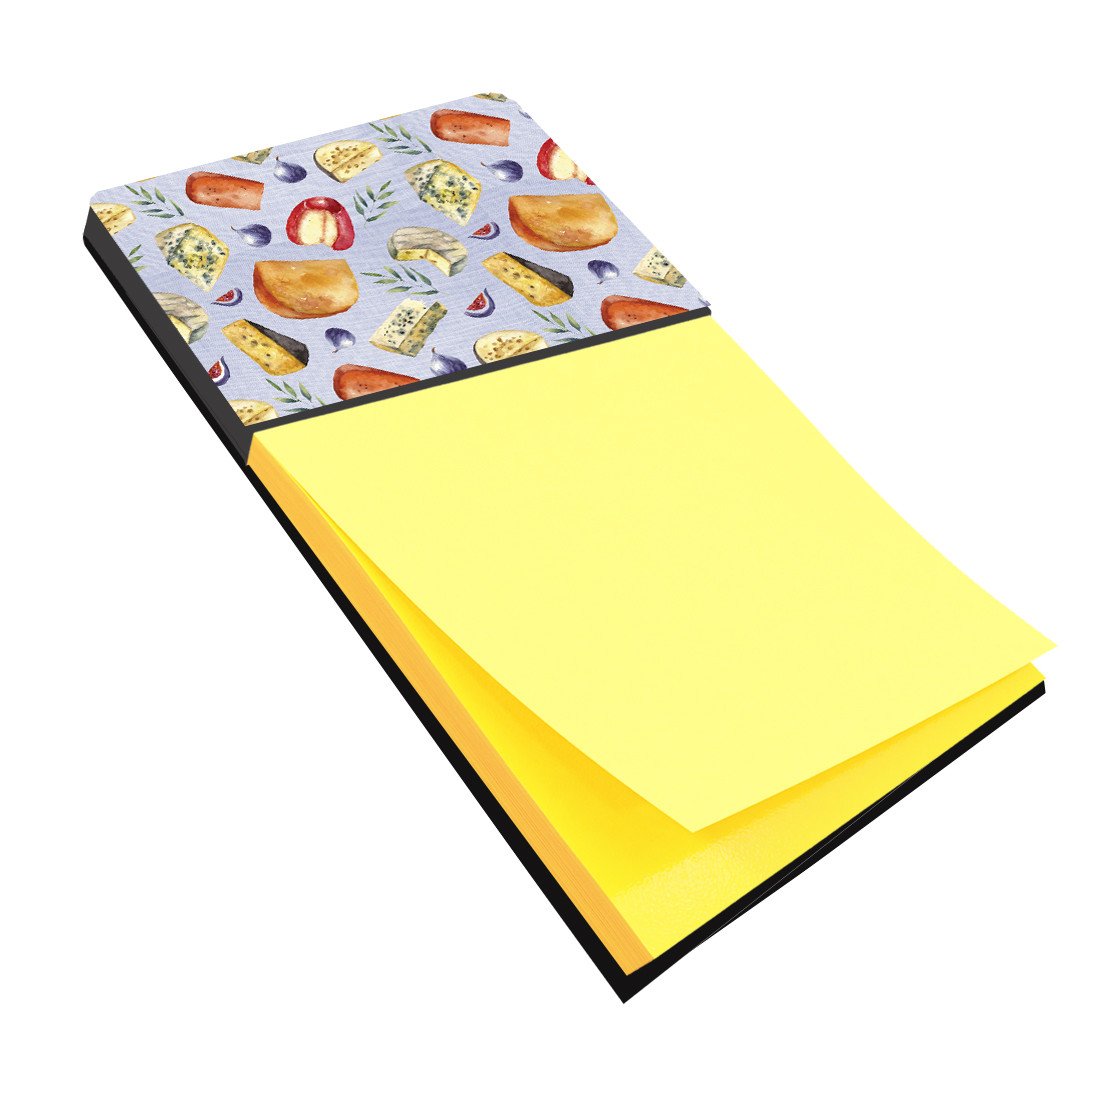 Assortment of Cheeses Sticky Note Holder BB5198SN by Caroline's Treasures